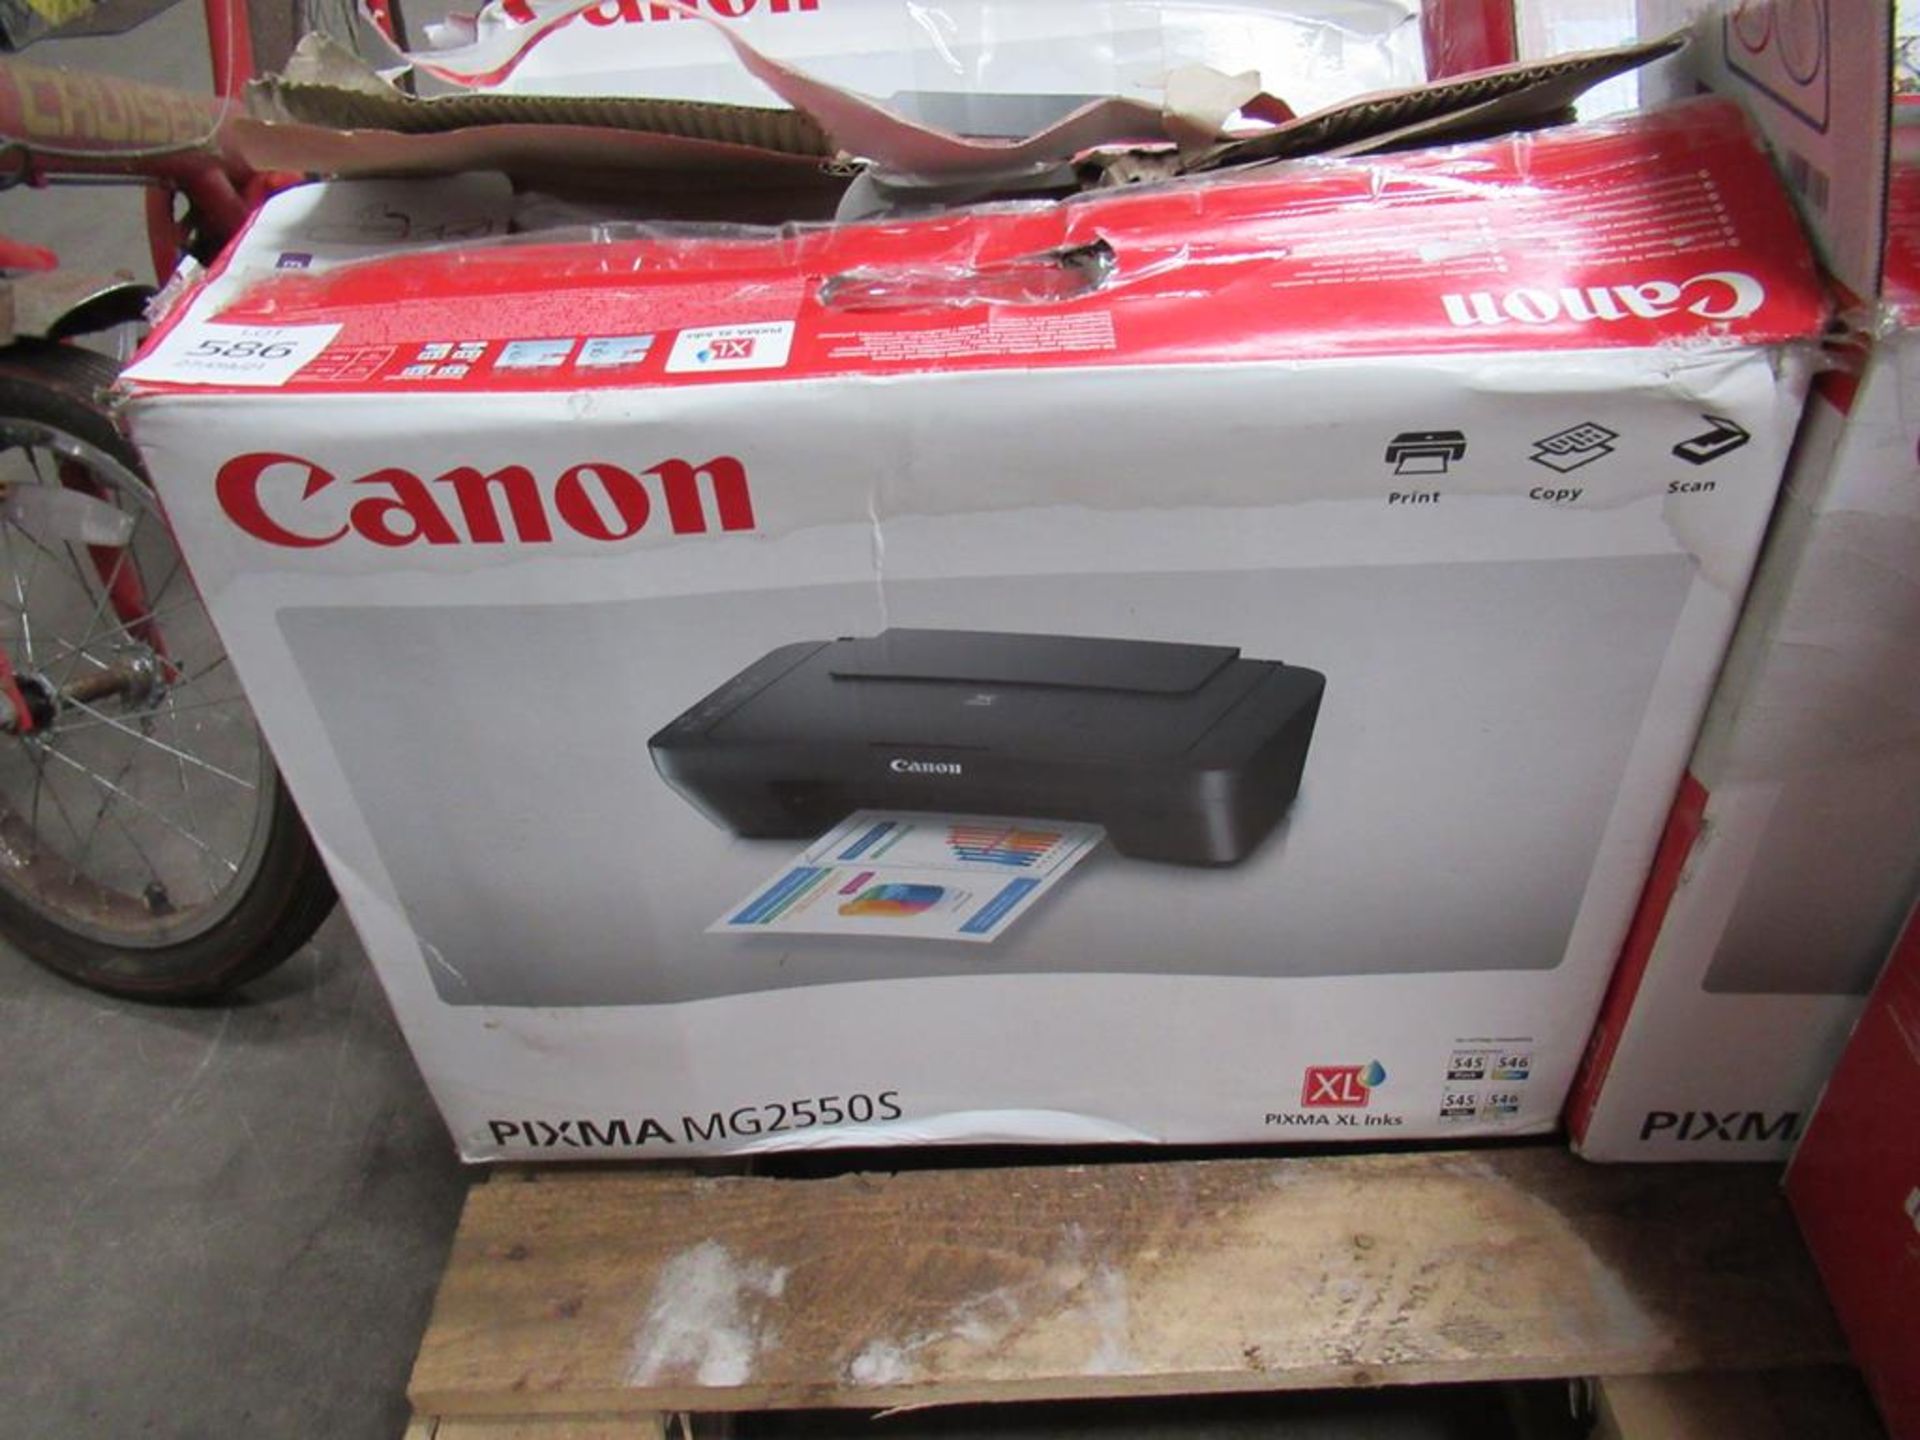 Two Cannon Printers